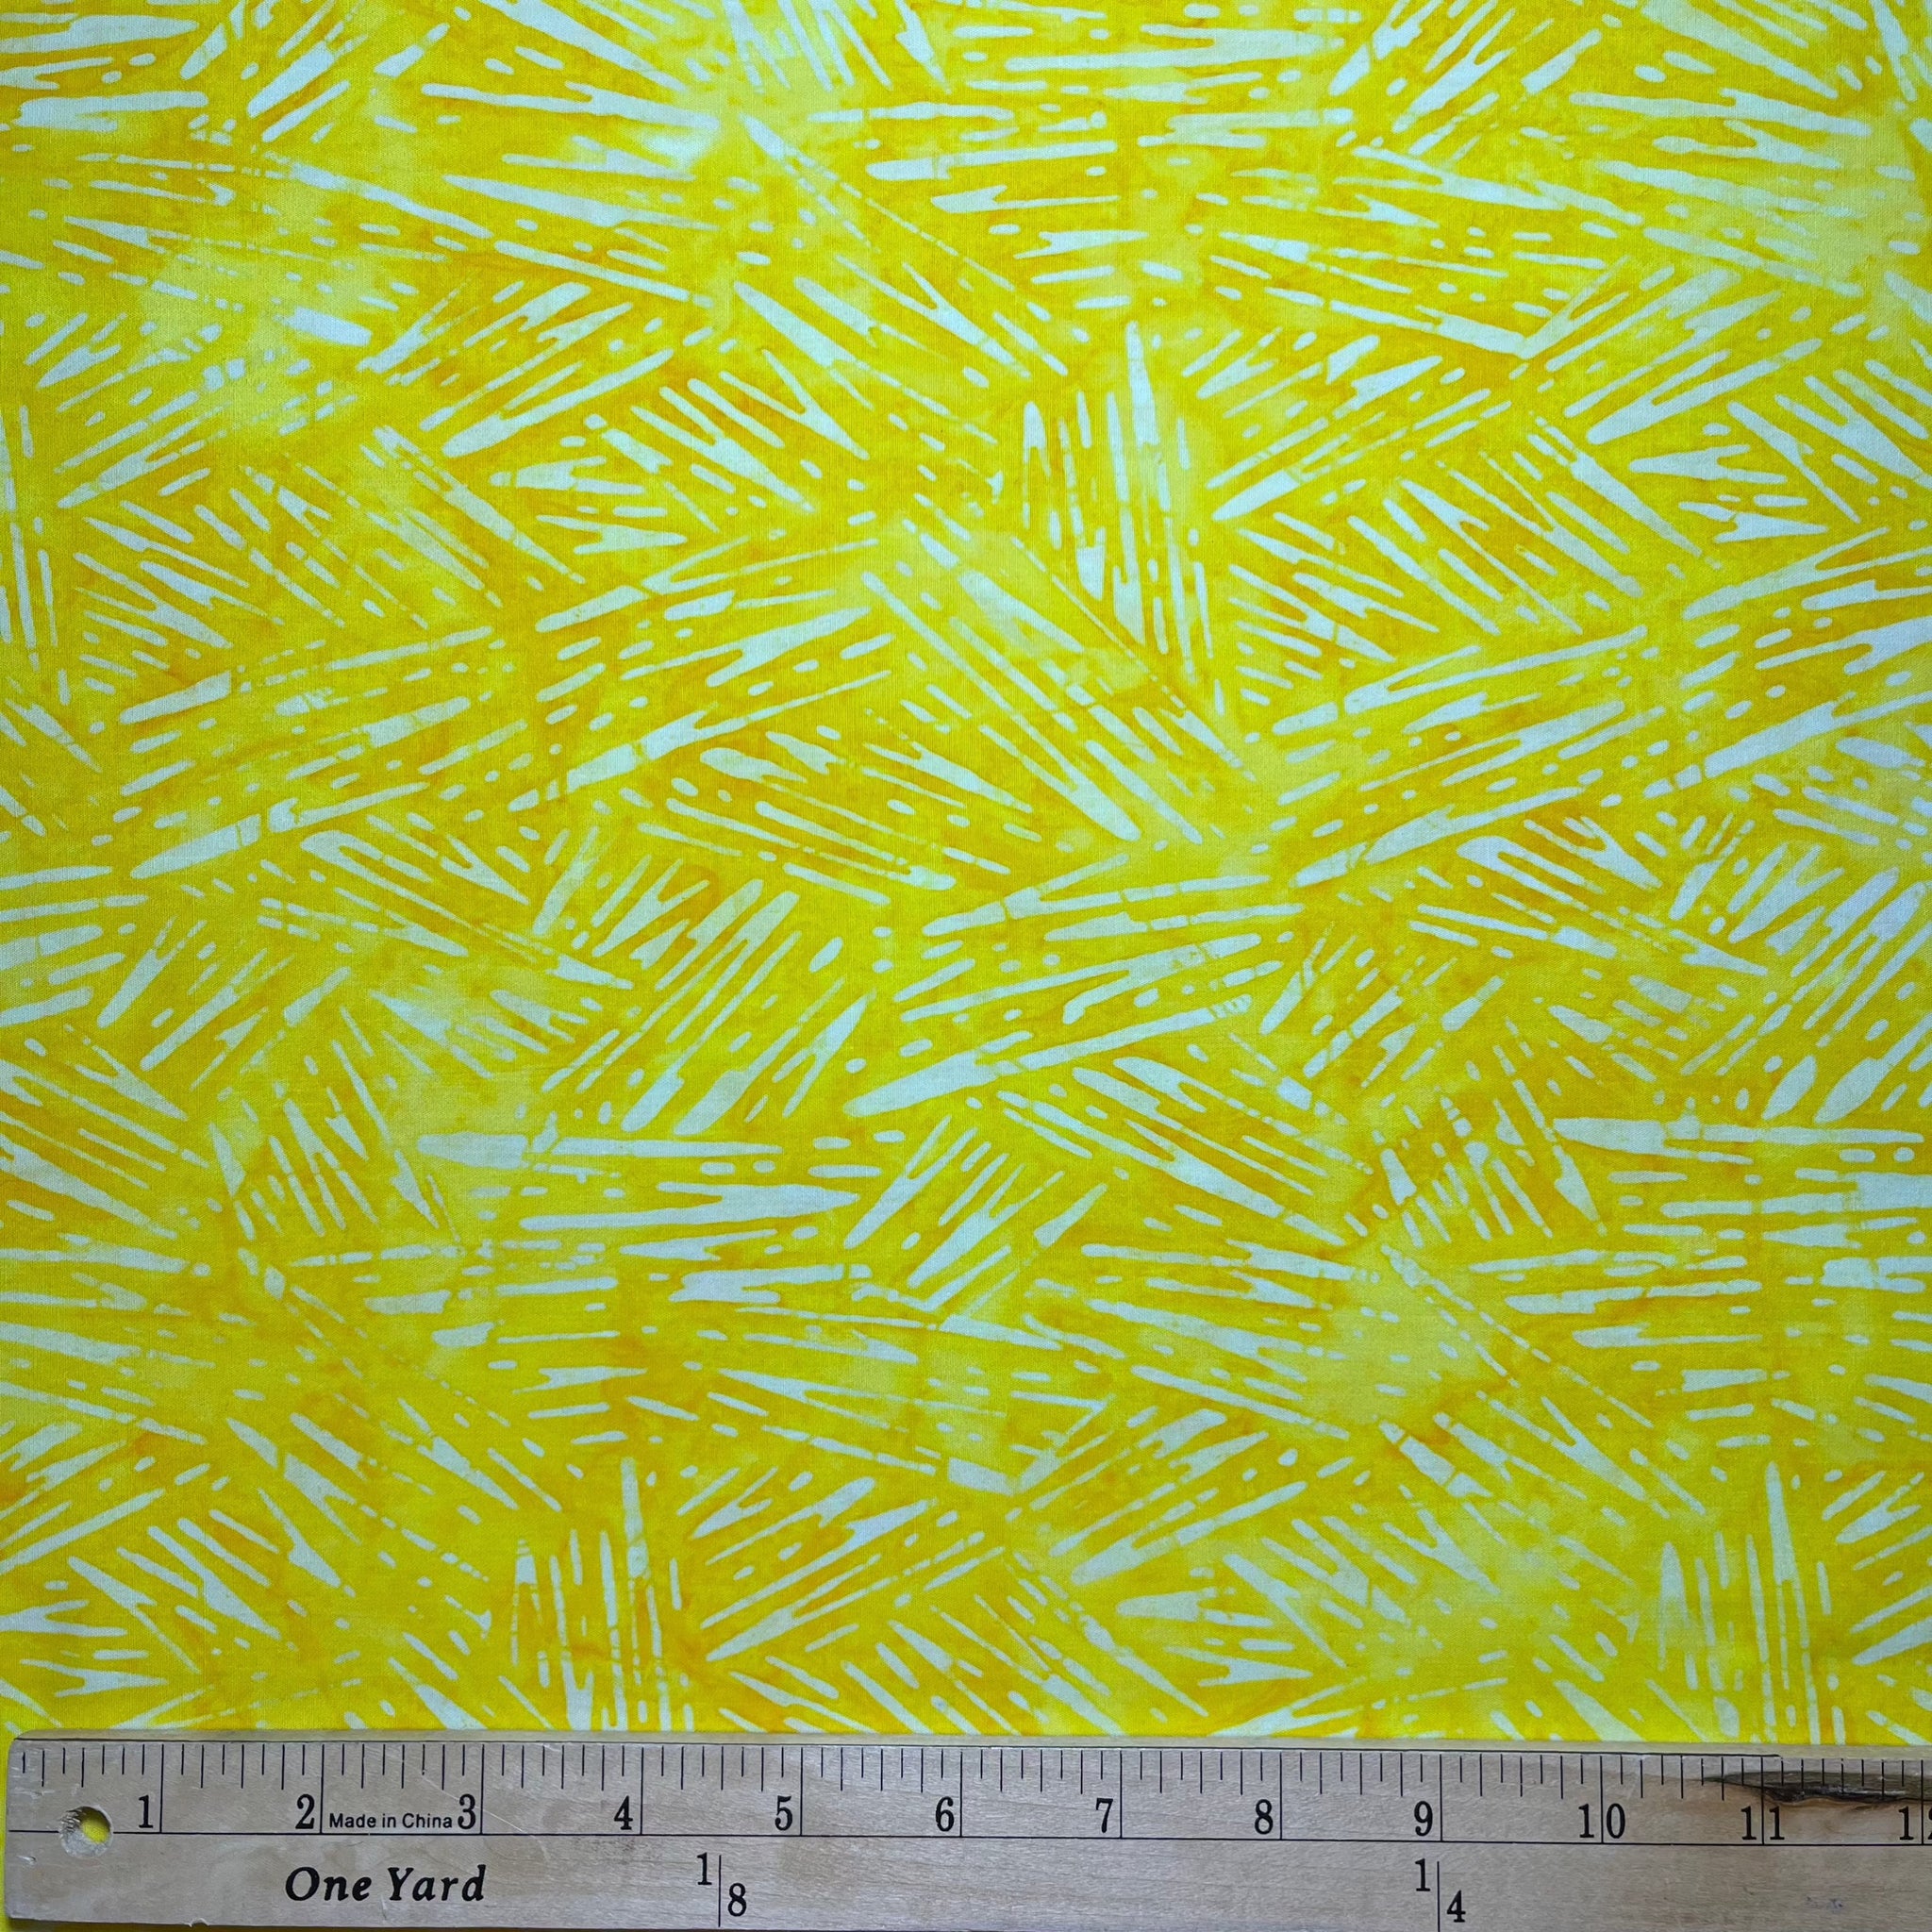 Velocity - Lemon is an abstract design in very light yellow/creamy white on a slightly darker slightly orangey yellow background.